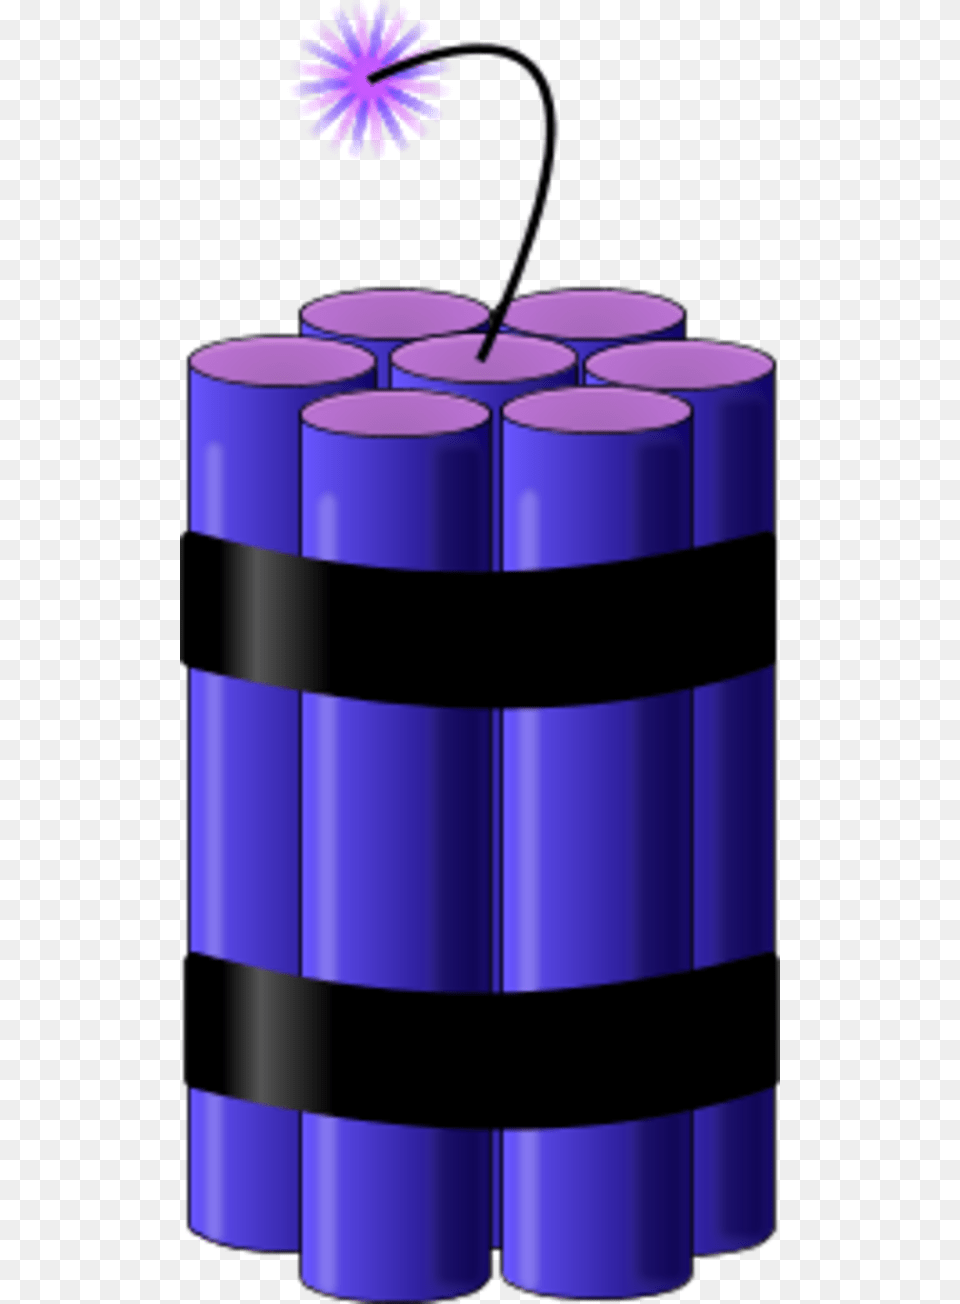 Dynamite With A Lit Fuse Transparent Dynamite, Weapon, Bottle, Shaker Png Image